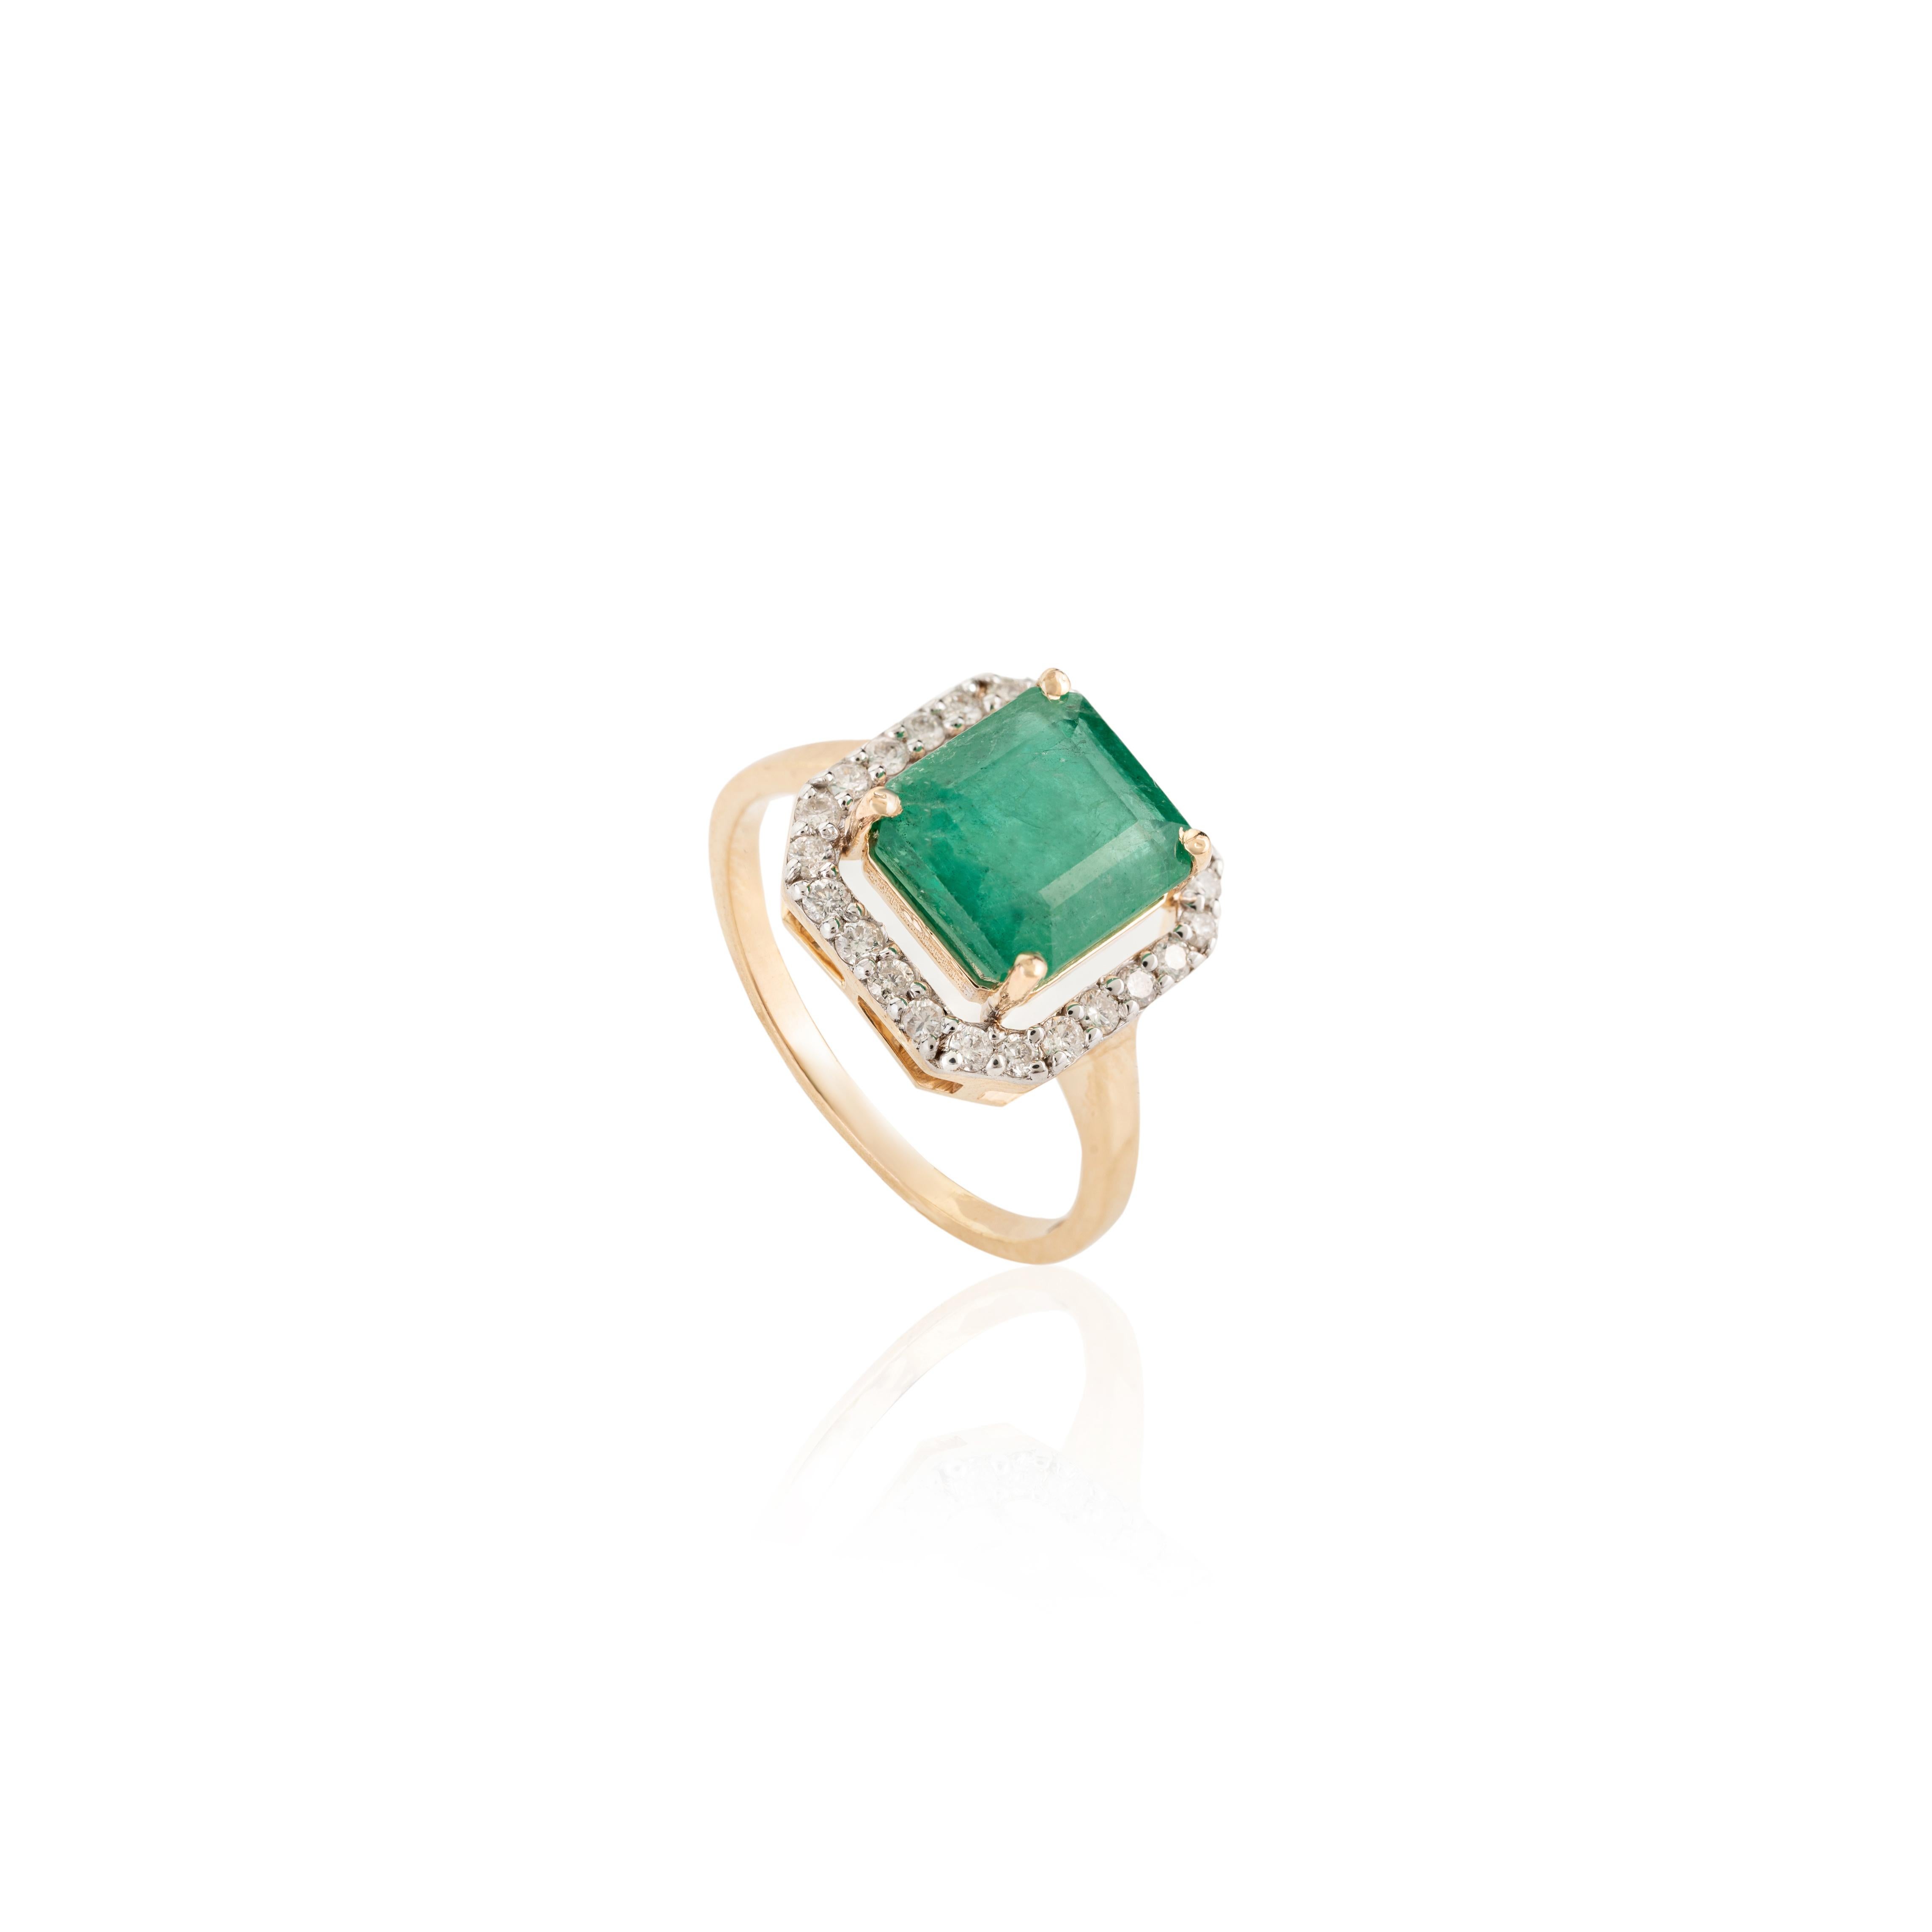 For Sale:  1.5 Carat Square Cut Emerald Diamond Halo Ring for Women in 18k Yellow Gold 8